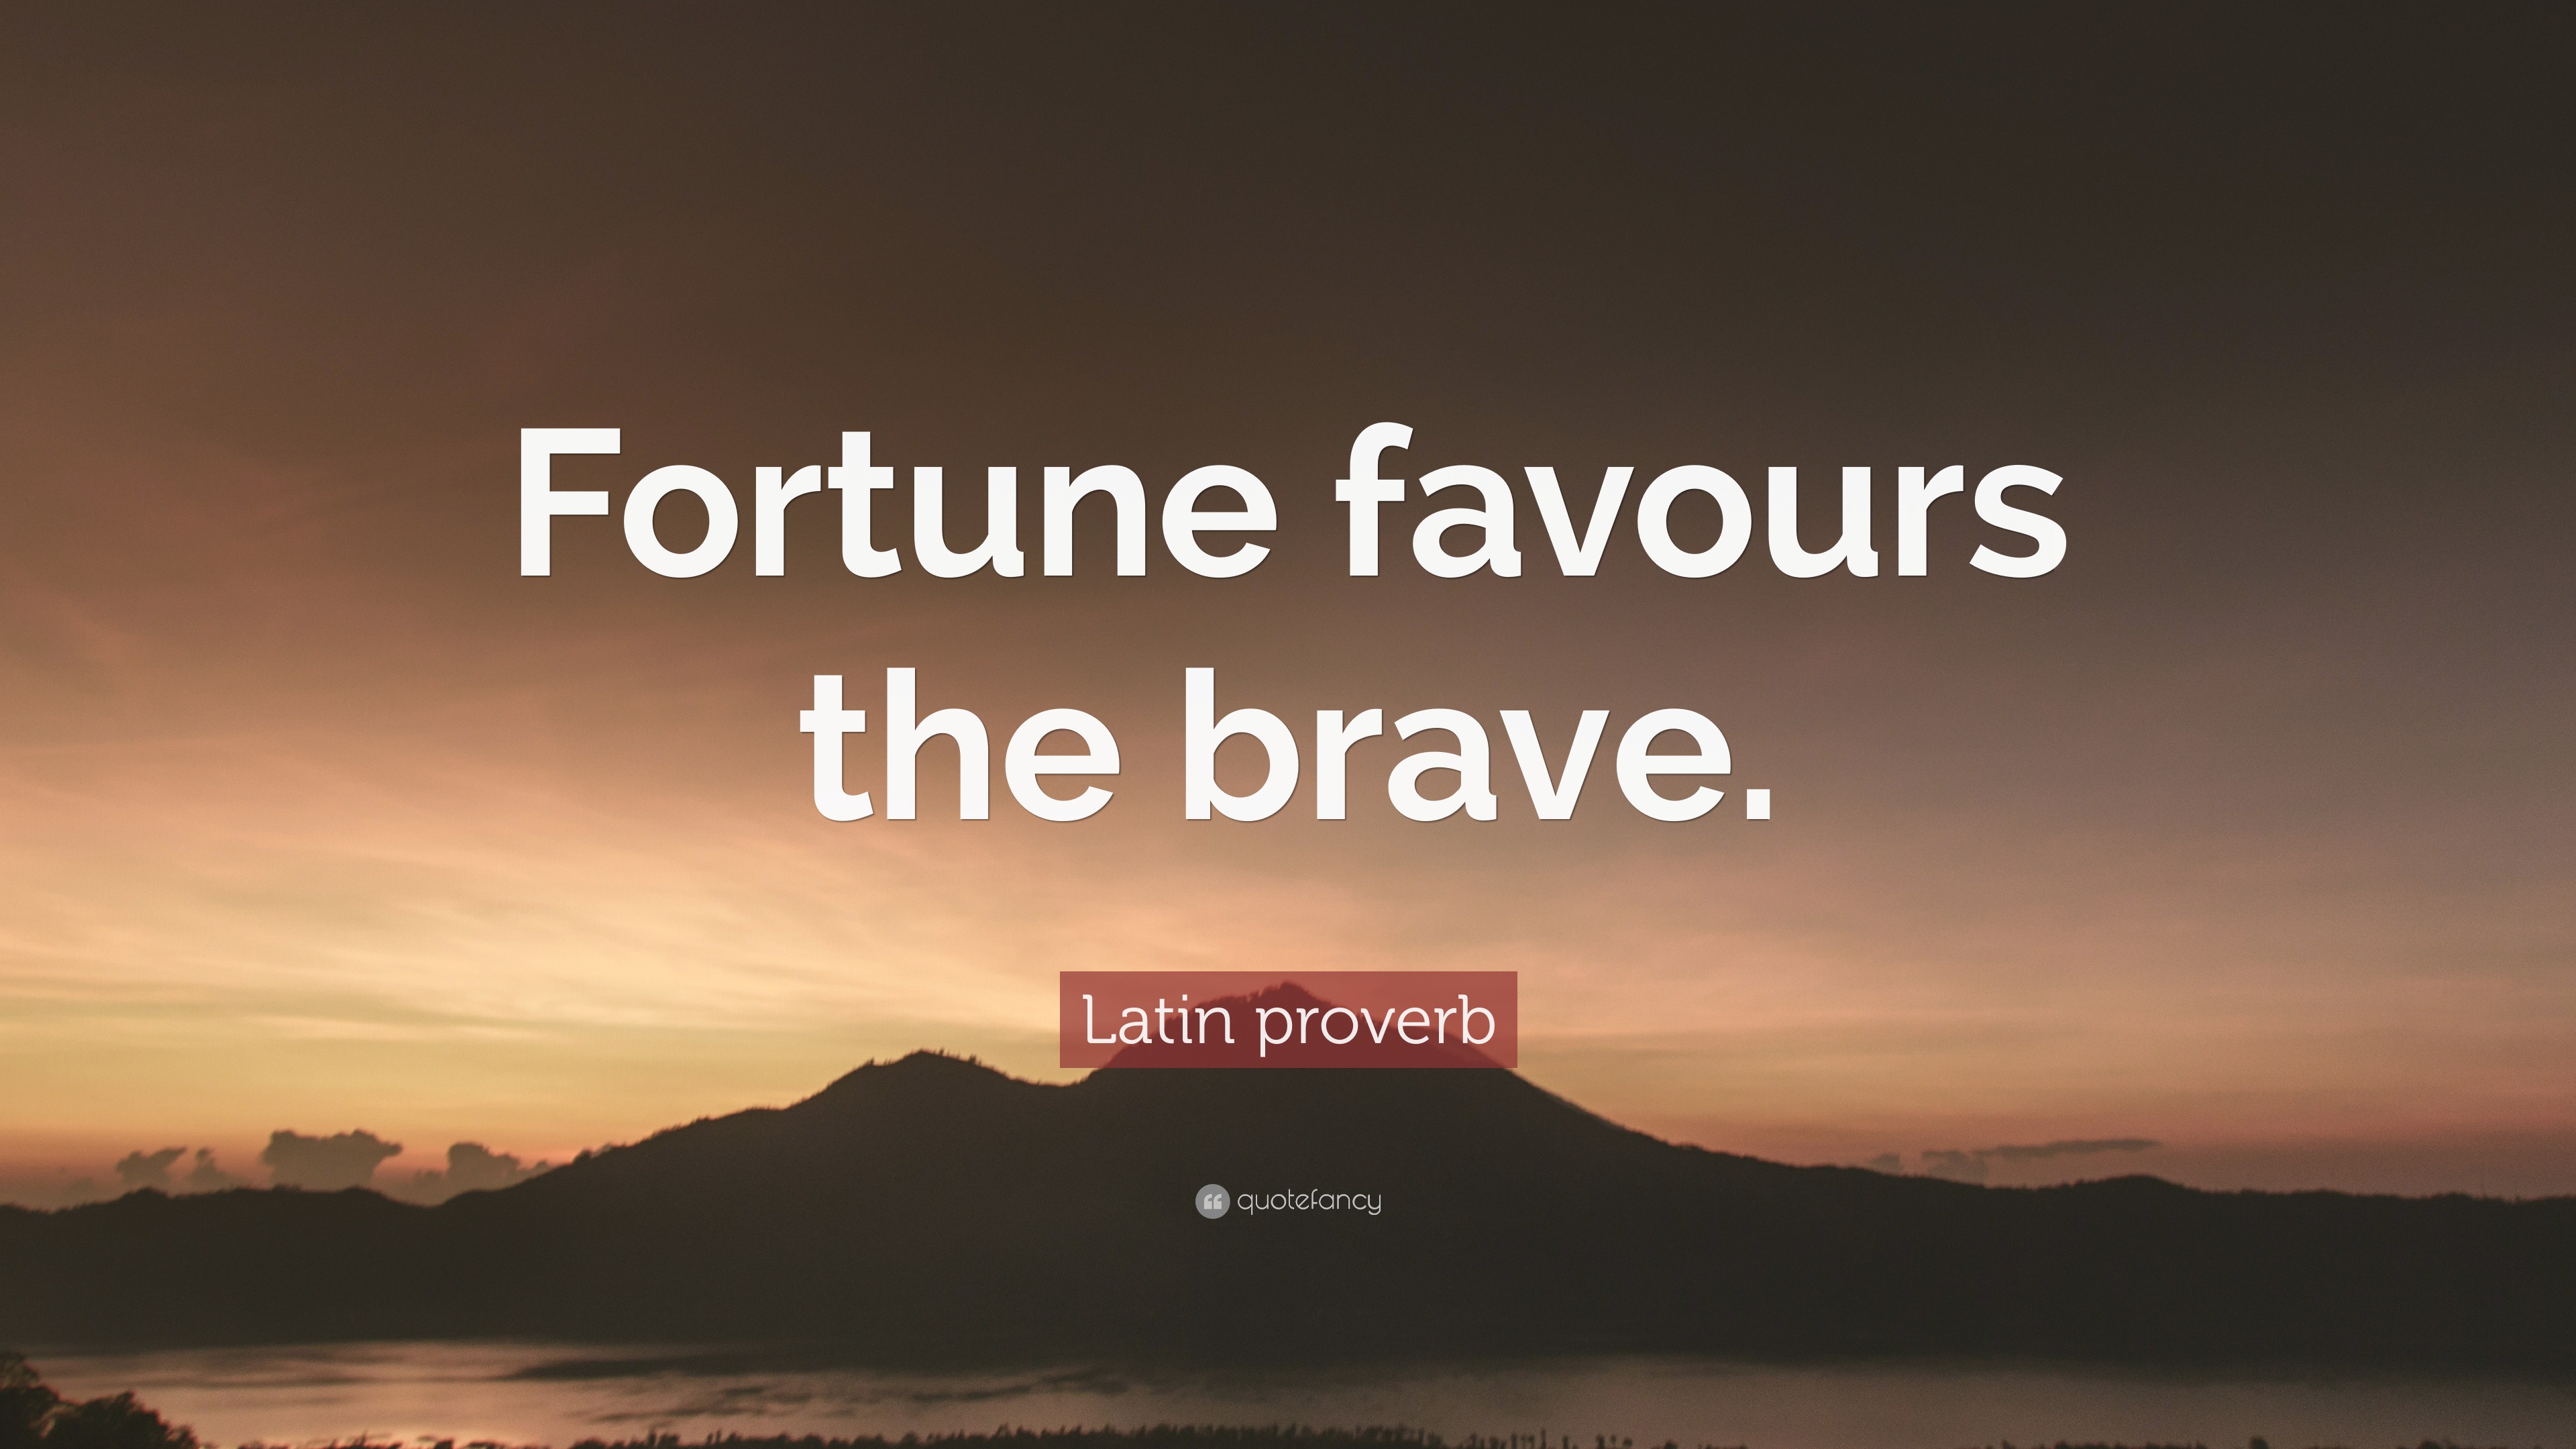 fortune favors the brave saying